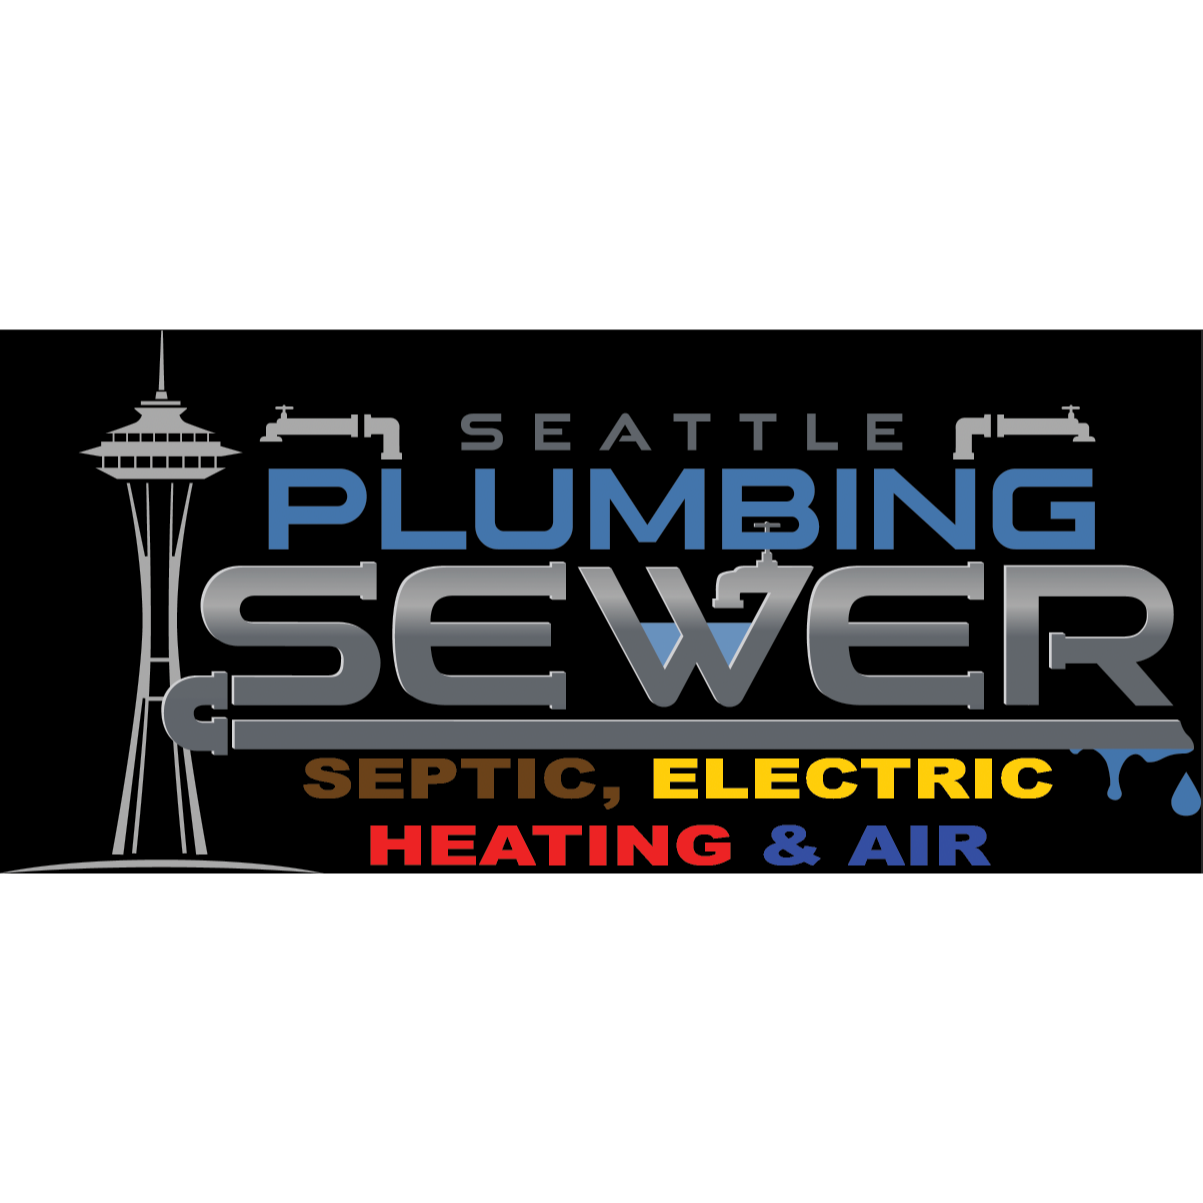 Seattle Plumbing, Electric, Septic, Sewer & Heating - Seattle, WA 98126 - (206)495-0376 | ShowMeLocal.com